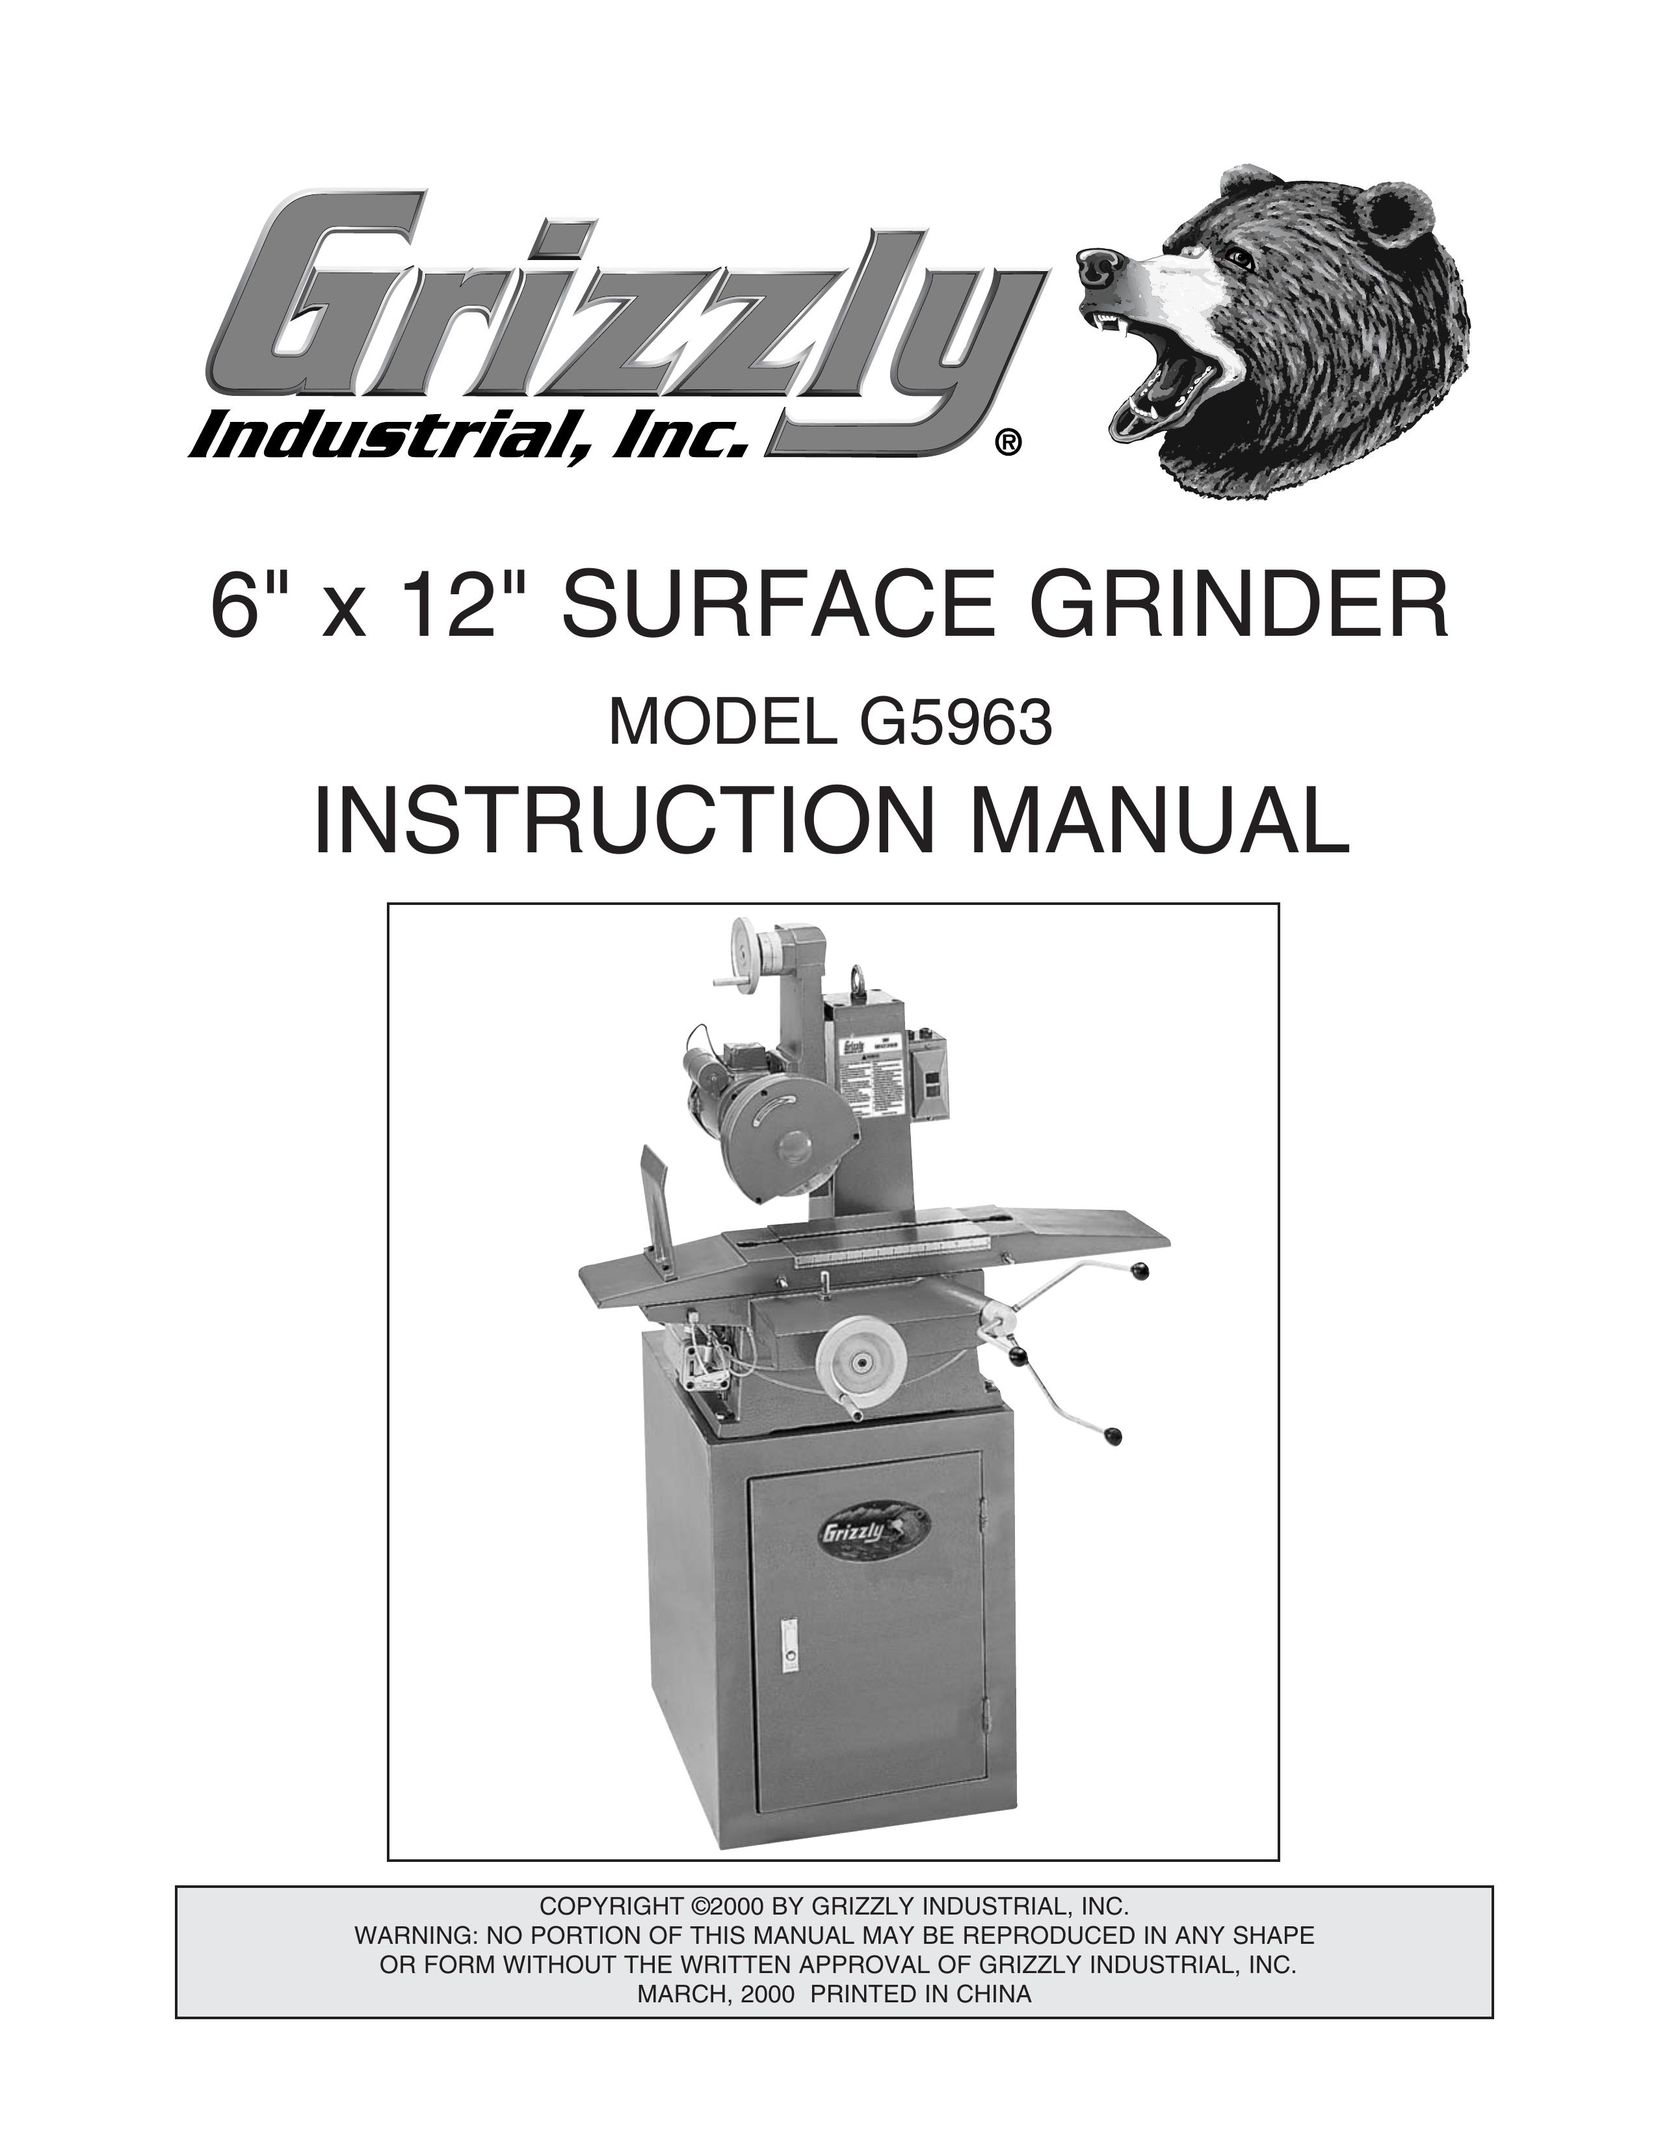 Grizzly G5963 Grinder User Manual